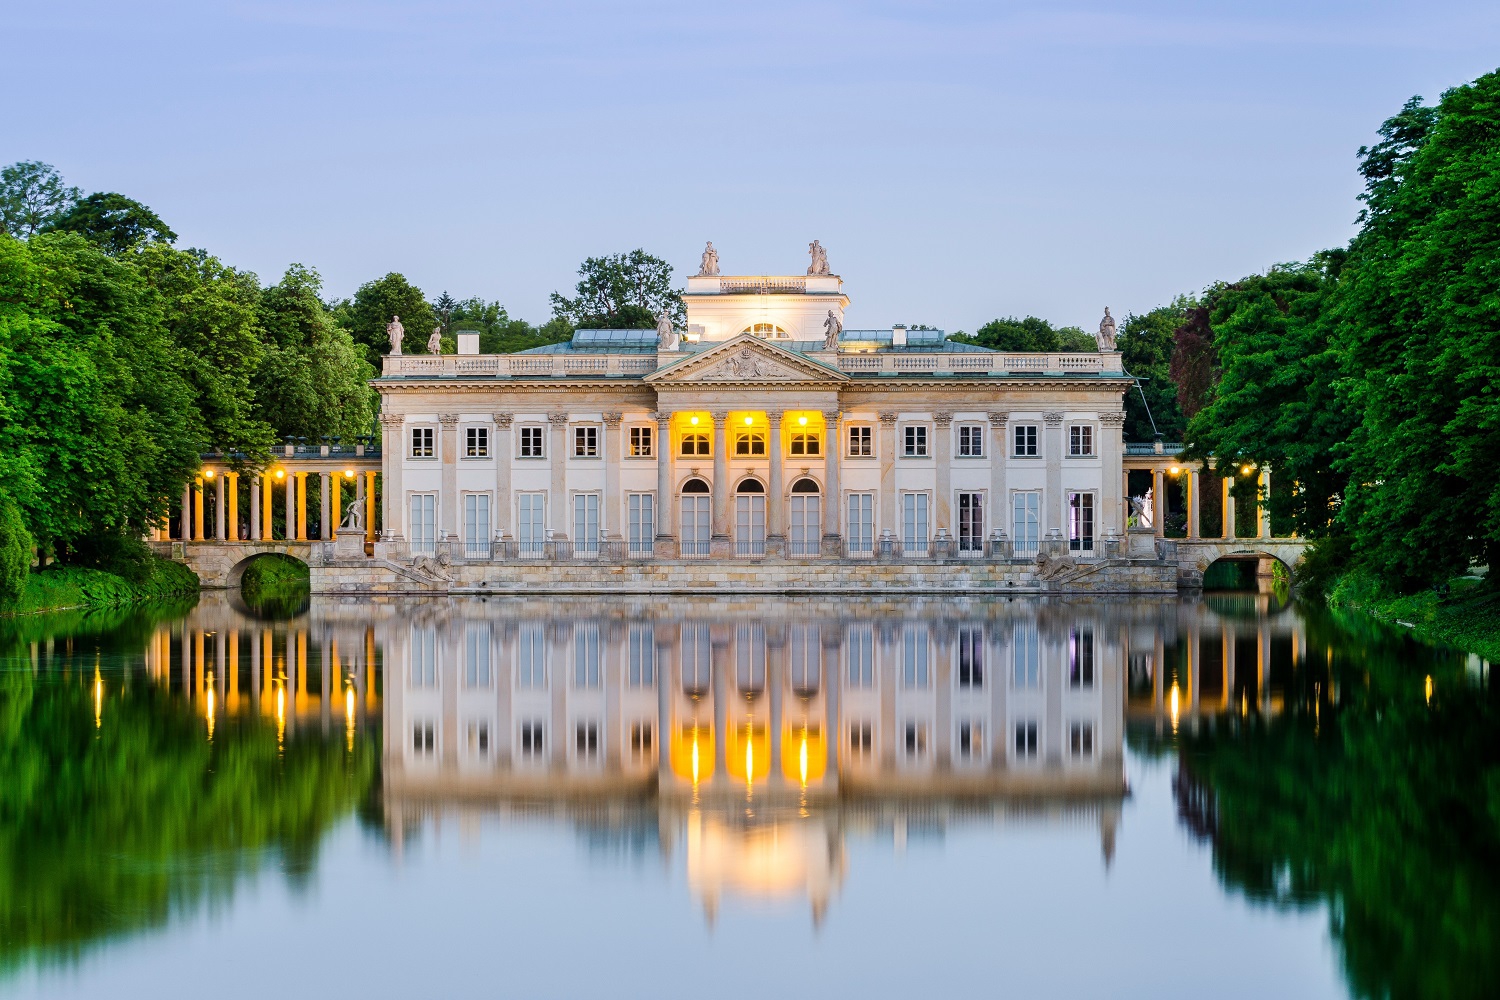 Royal Palace in Lazienki Park